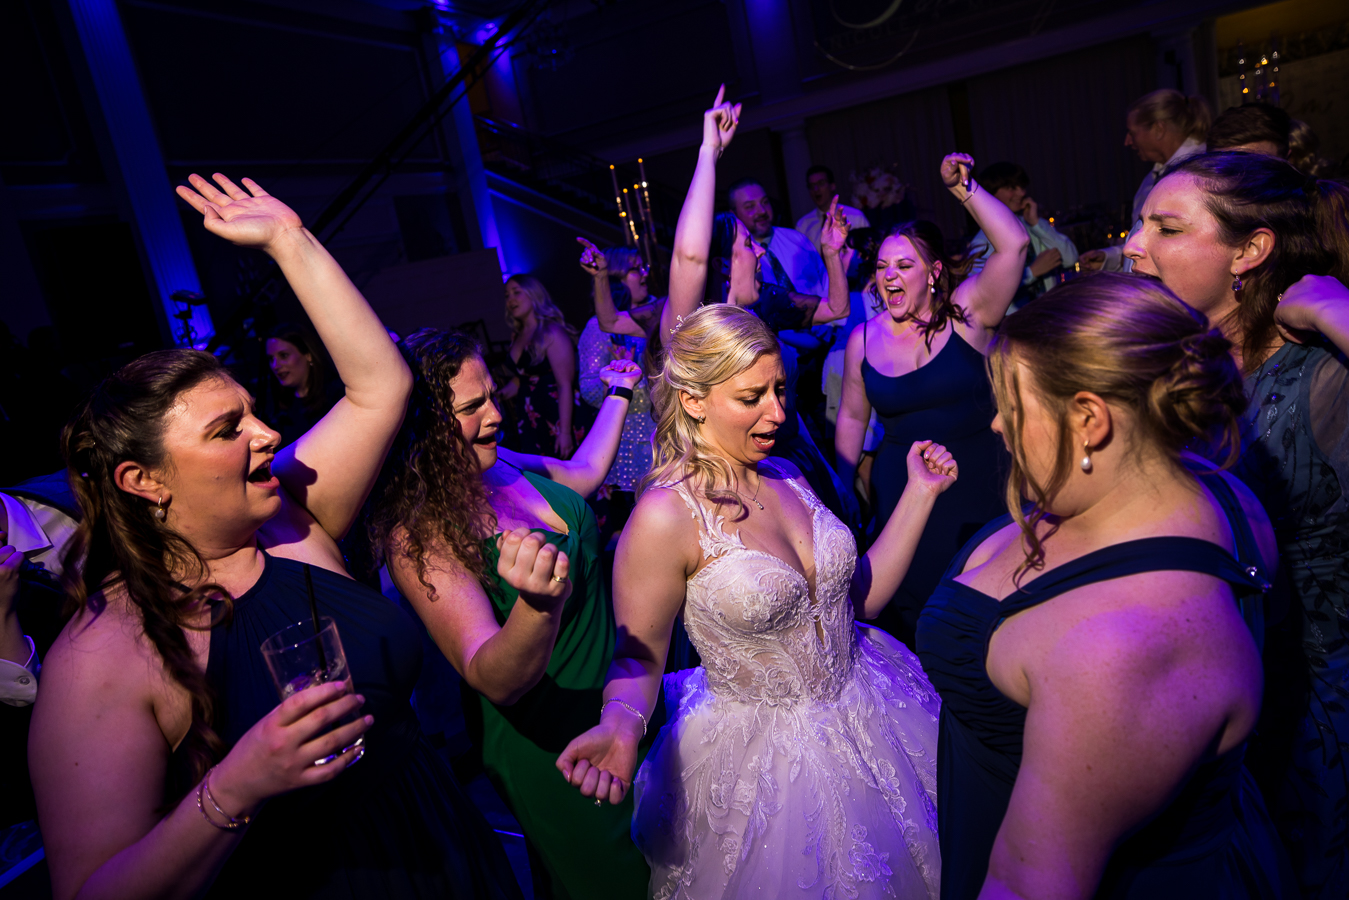  lisa rhinehart, captures this fun, creative angle of the bride as she dances with her friends and wedding guests